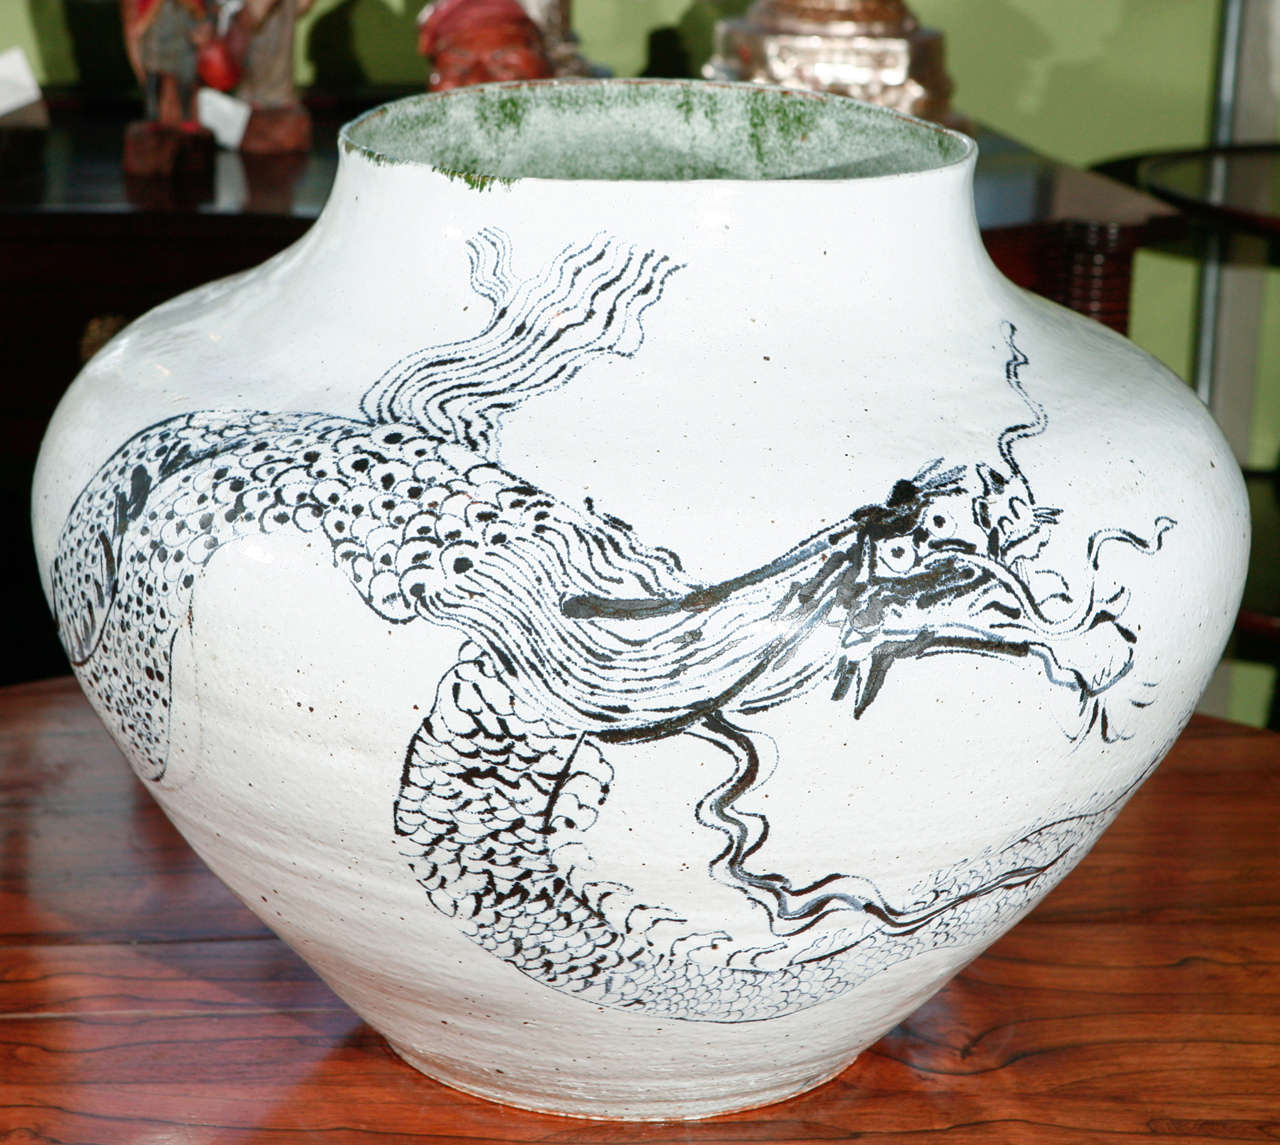 Michael and Magdalena Frimkess ceramic vessel depicting a dragon, signed